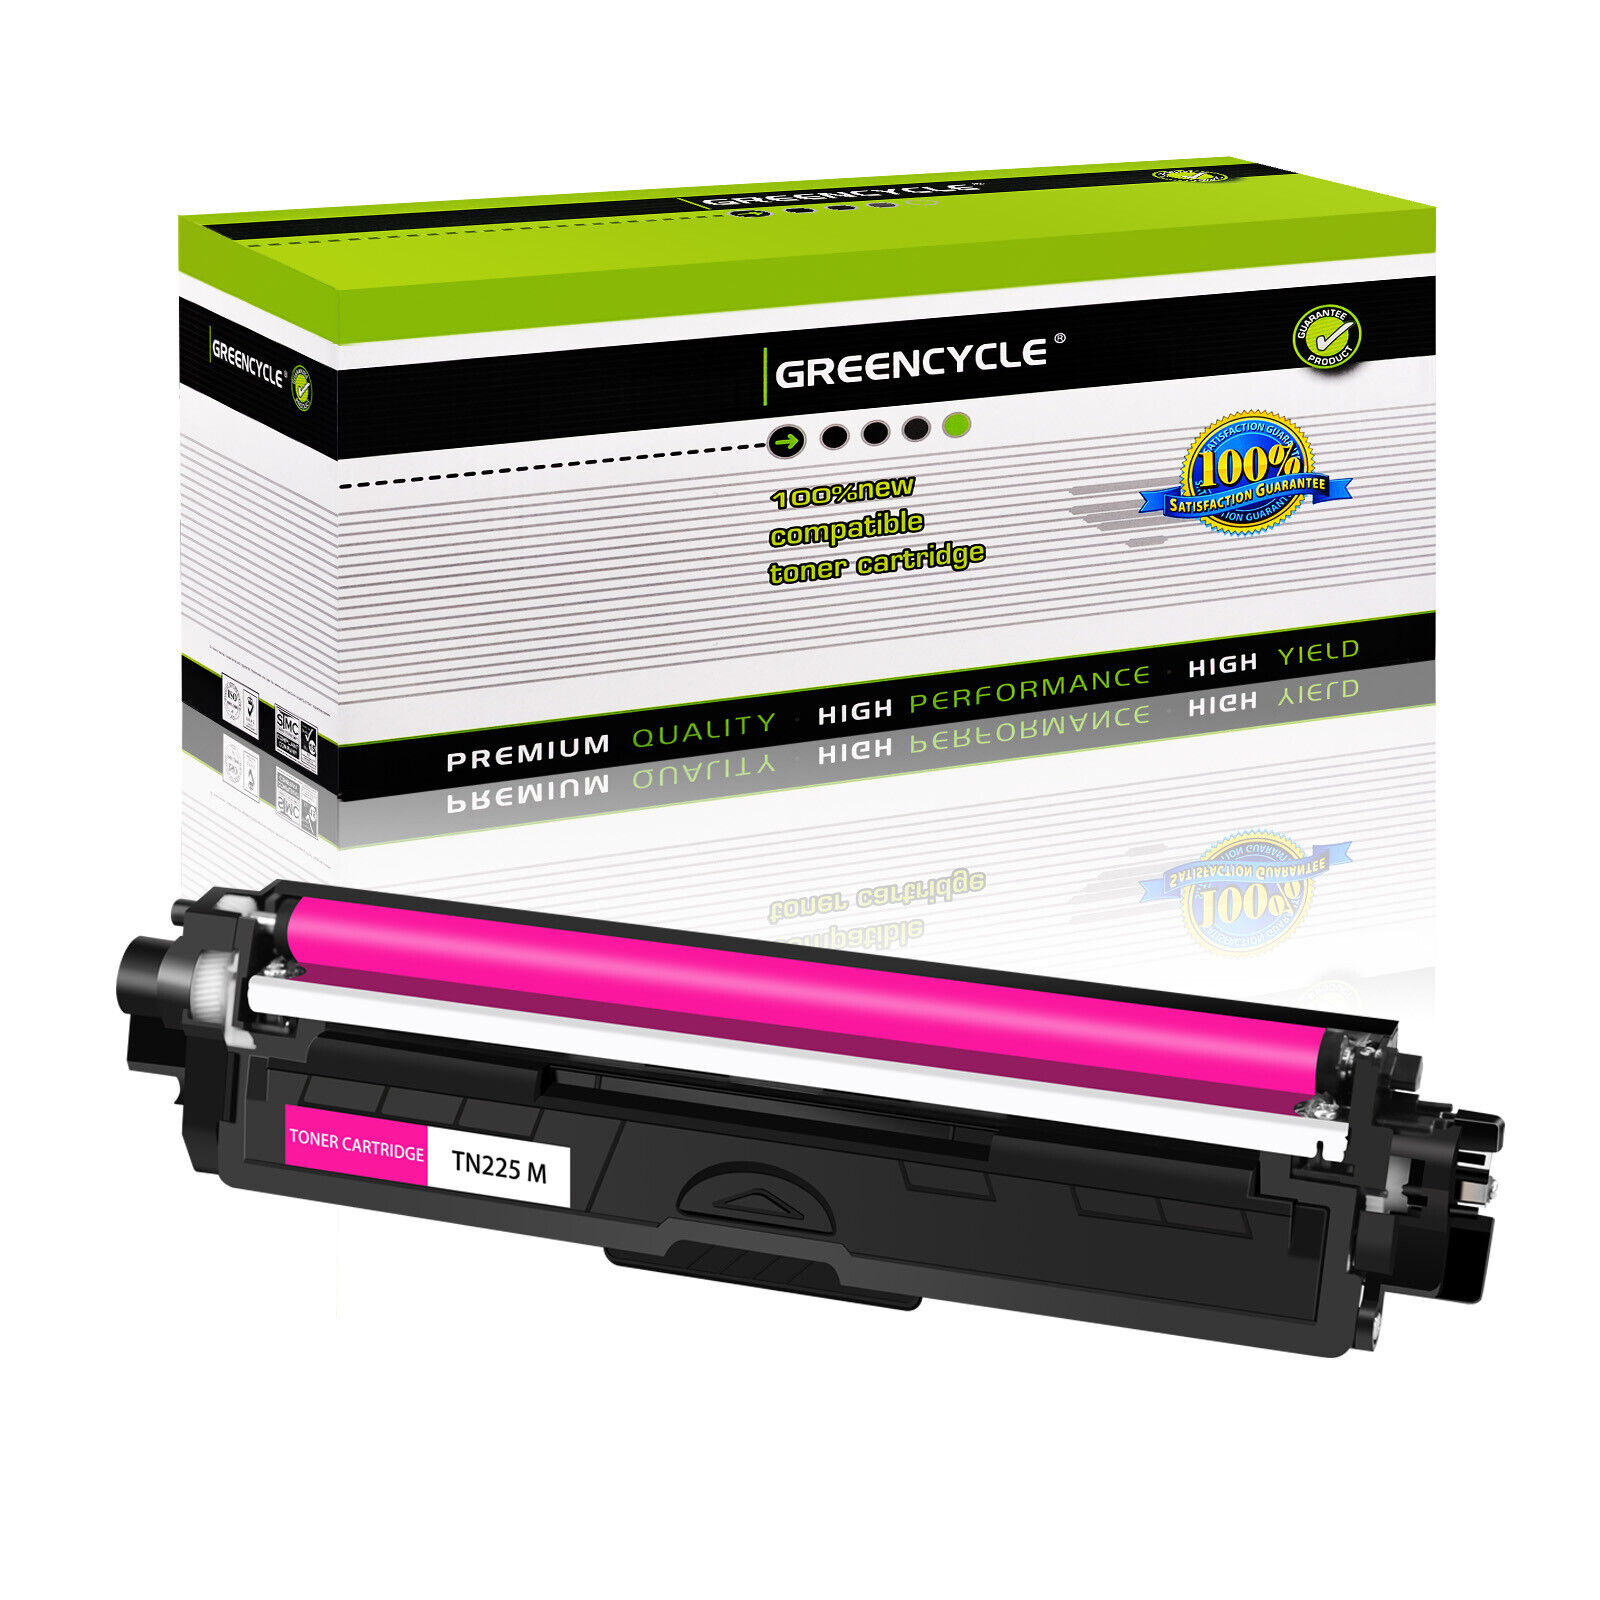 1× TN225M Magenta Toner Cartridge Compatible with Brother MFC-9130CW MFC-9330CDW